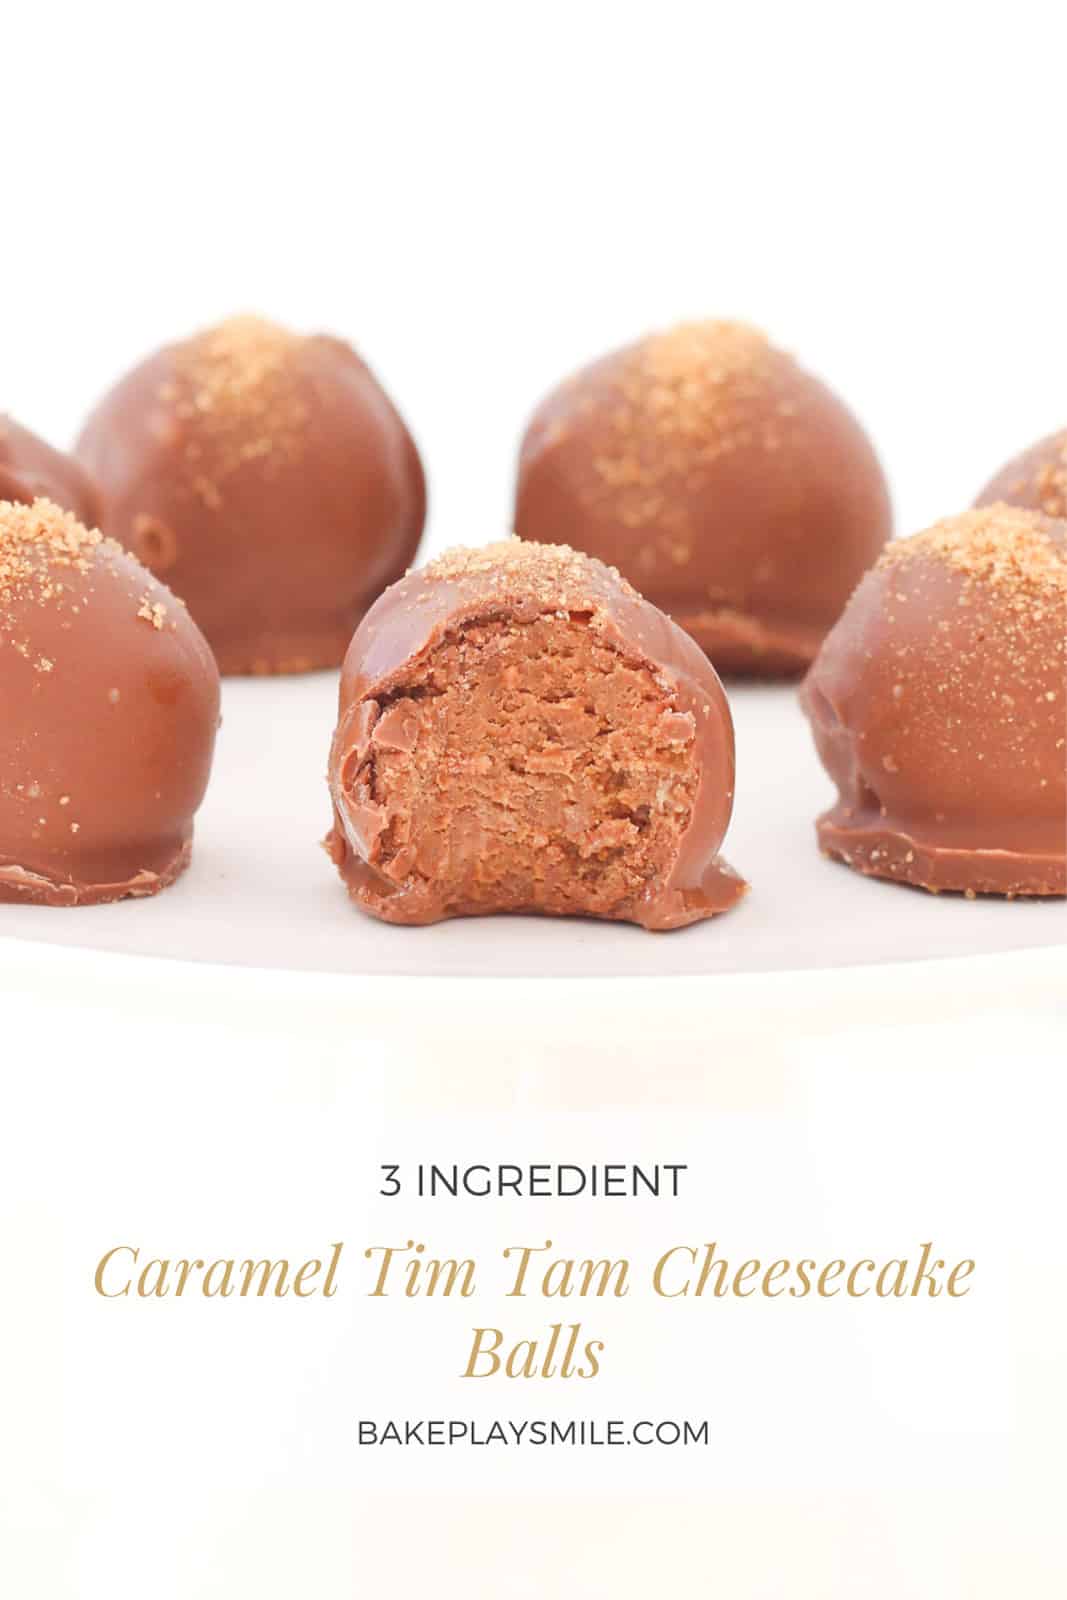 A Pinterest image with the text Caramel Tim Tam Cheesecake Balls and a plate of cheesecake balls with the front one bitten in to to show filling.